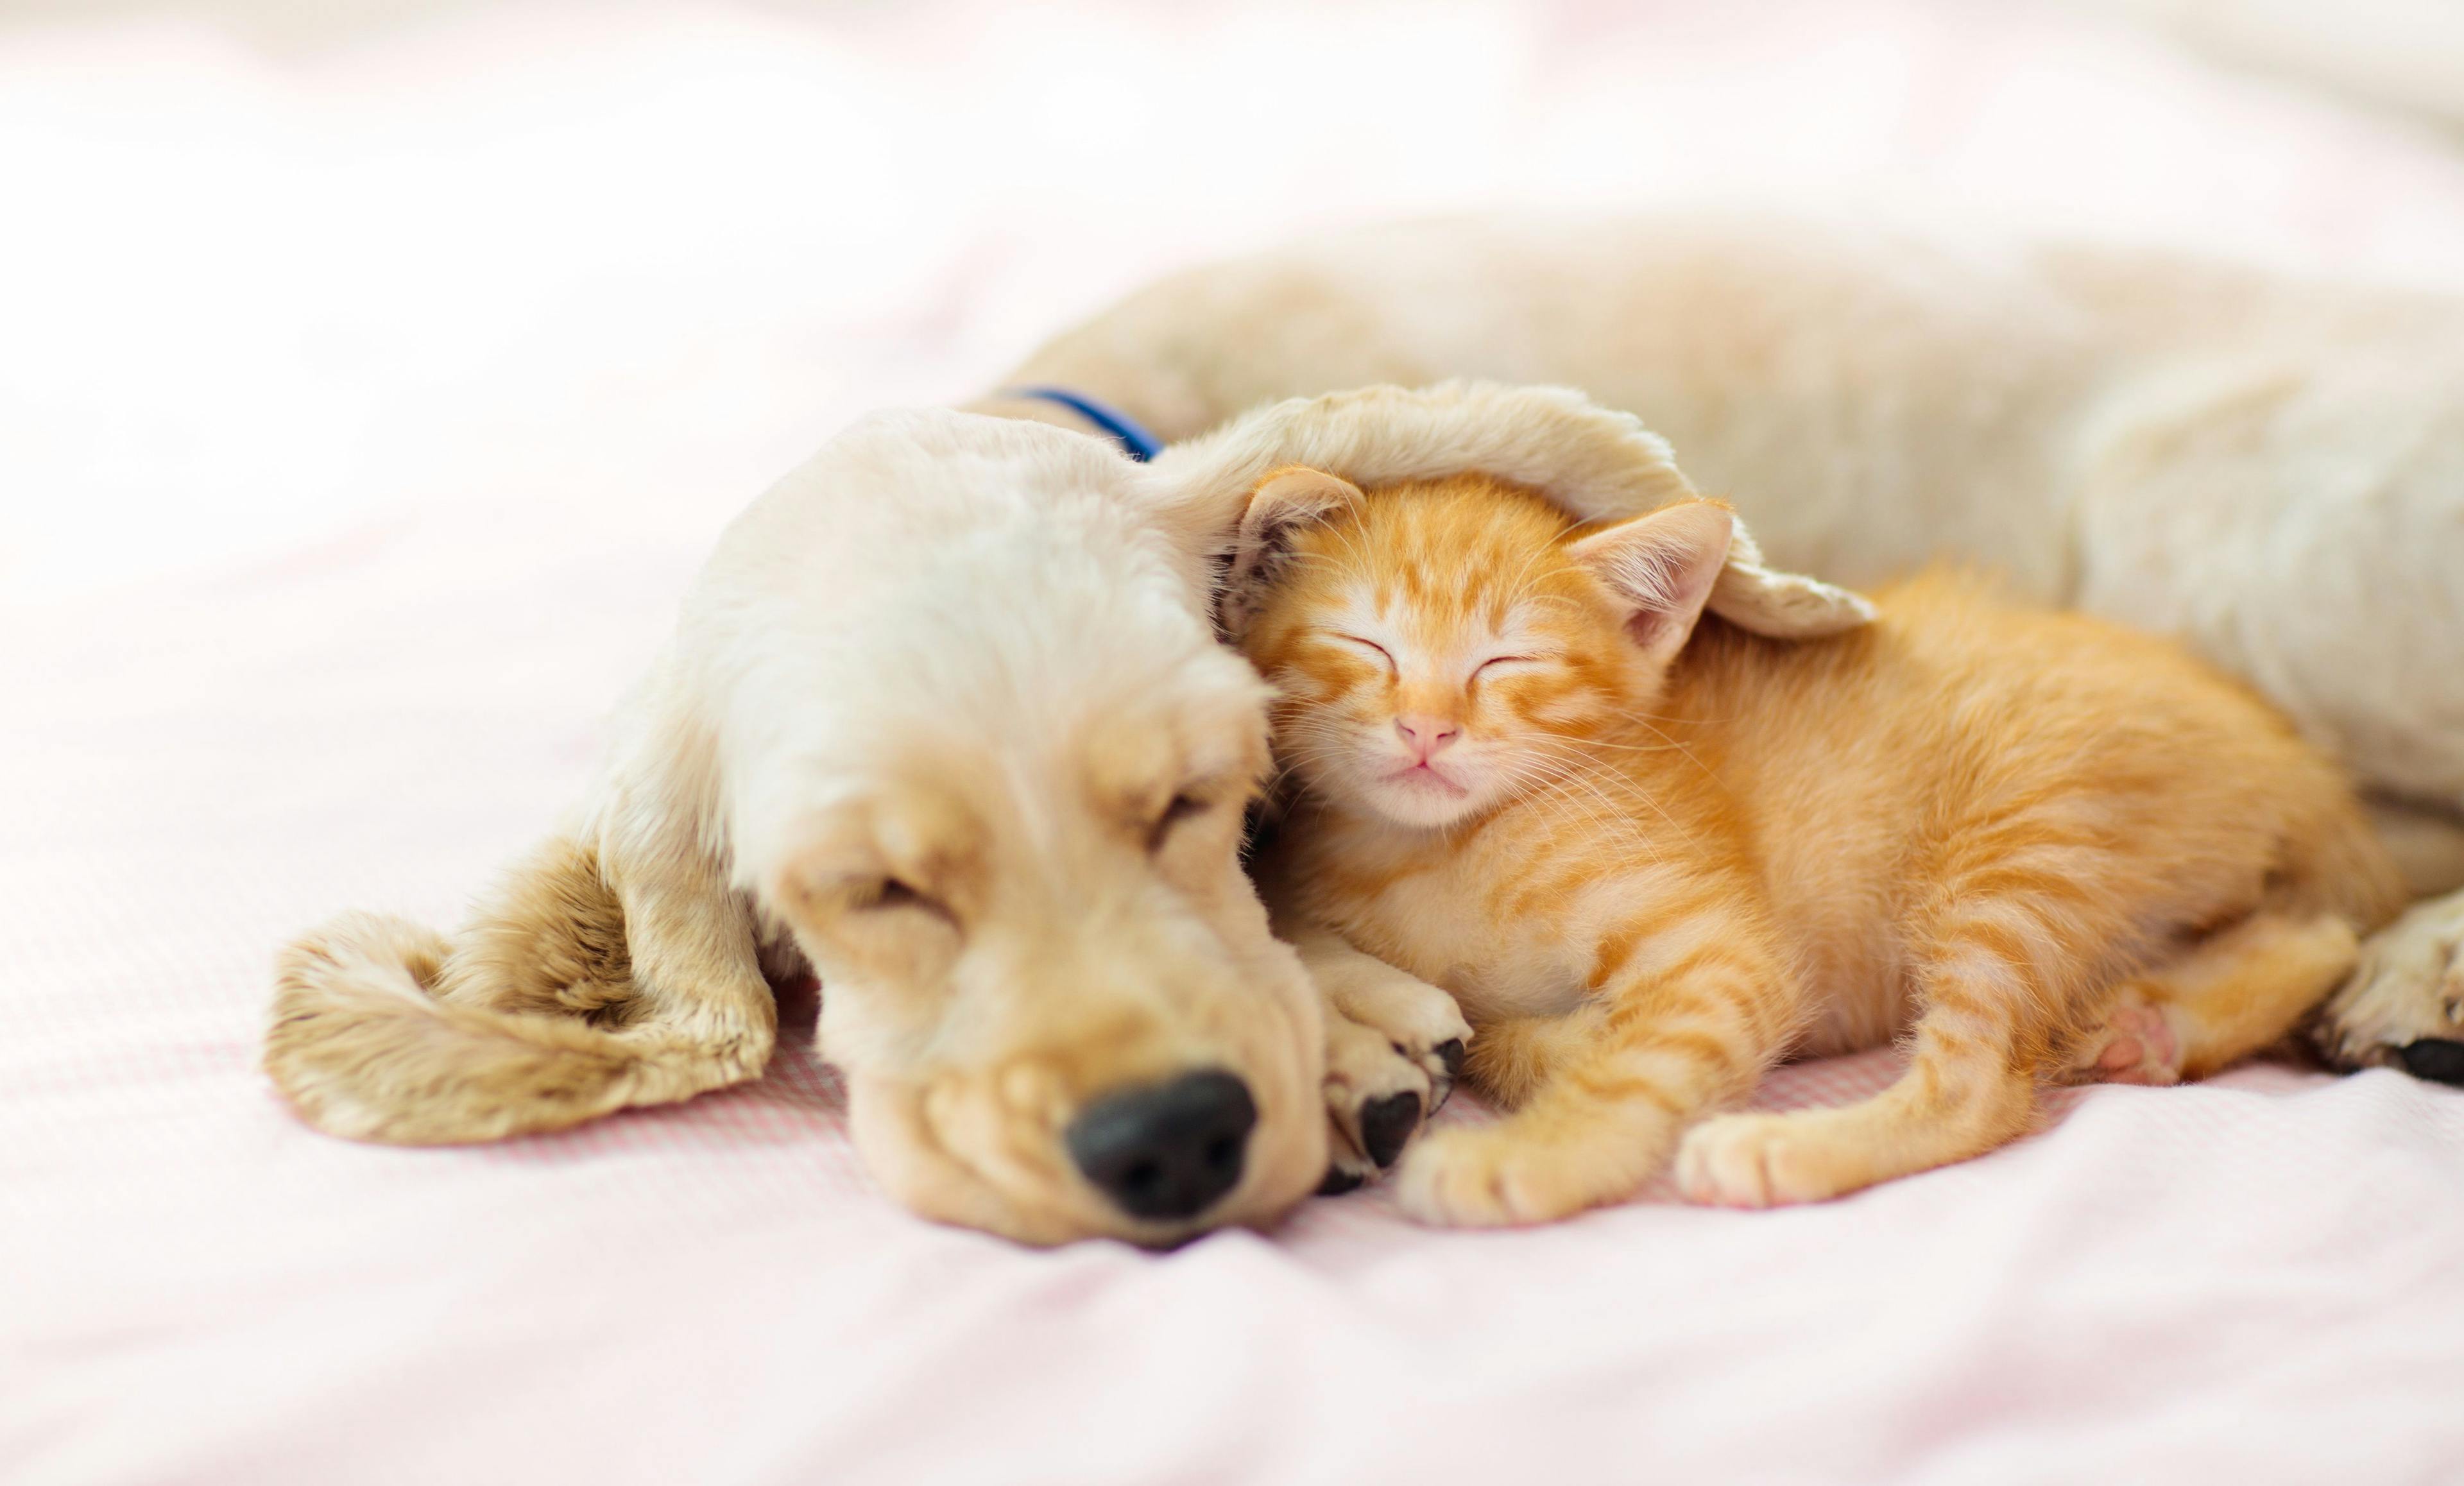 Factors affecting your deworming protocols for puppies and kittens